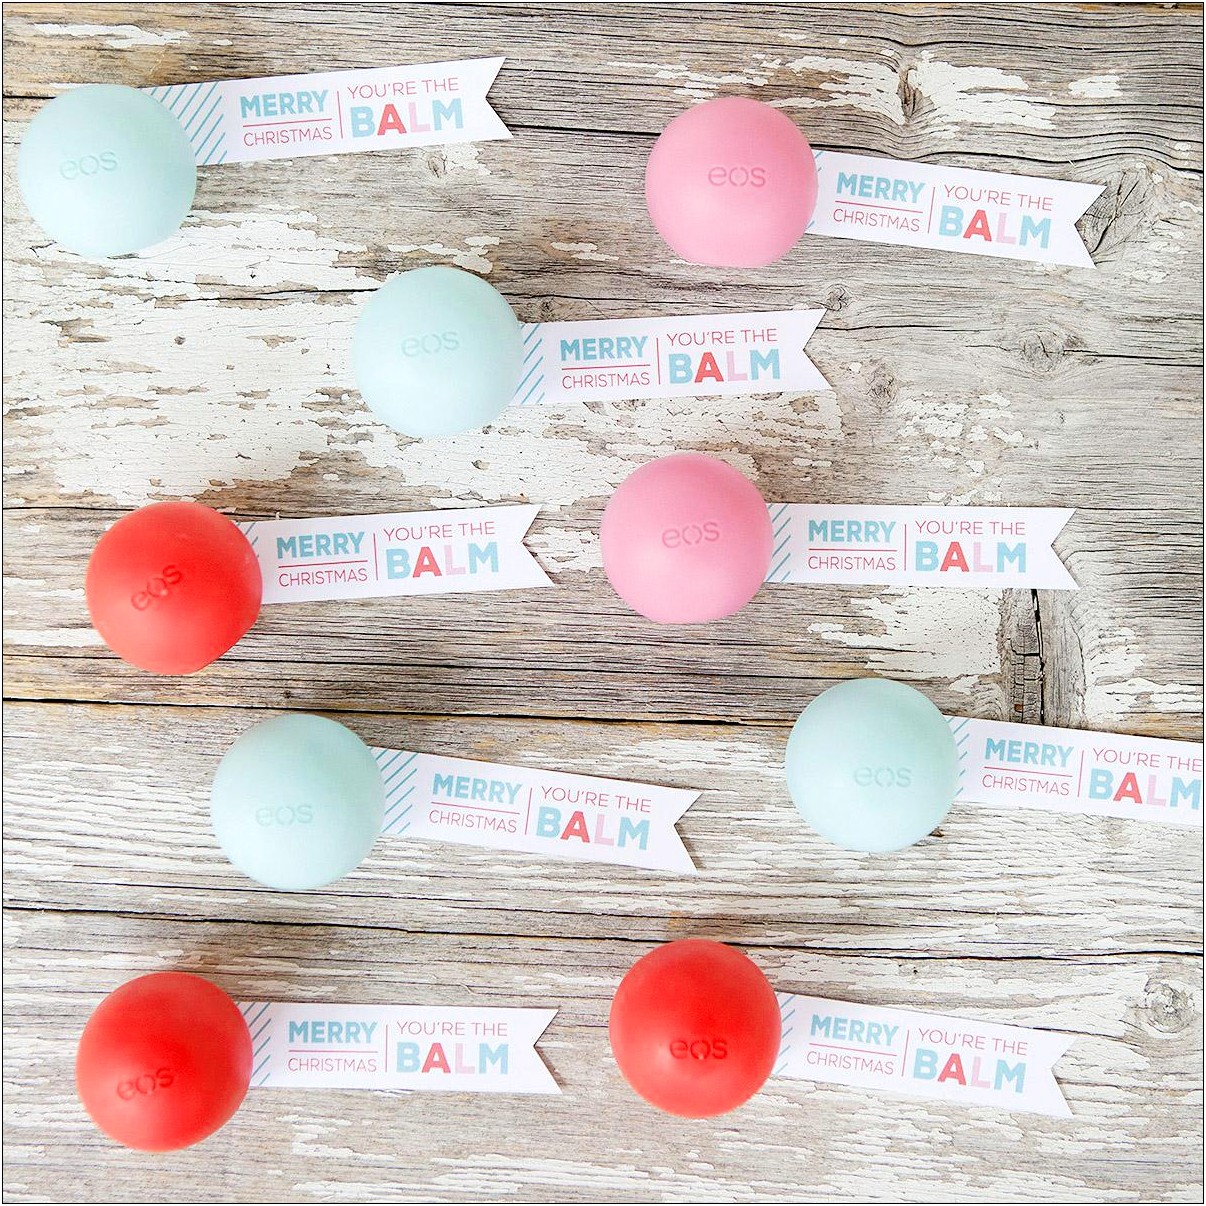 Eos Lip Balm Baby Shower Template Free